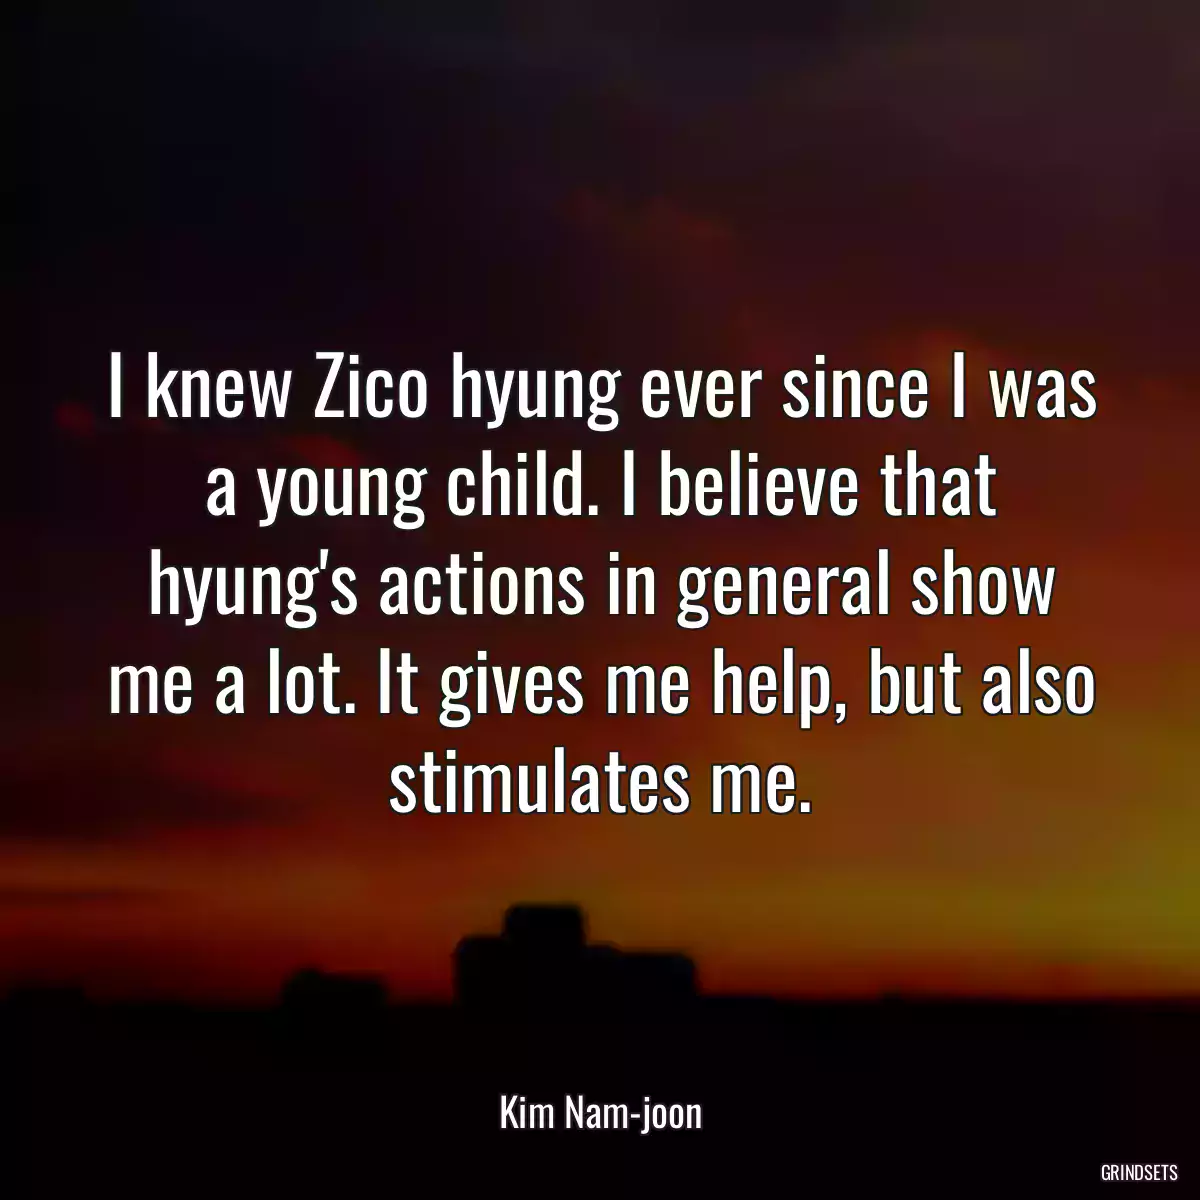 I knew Zico hyung ever since I was a young child. I believe that hyung\'s actions in general show me a lot. It gives me help, but also stimulates me.